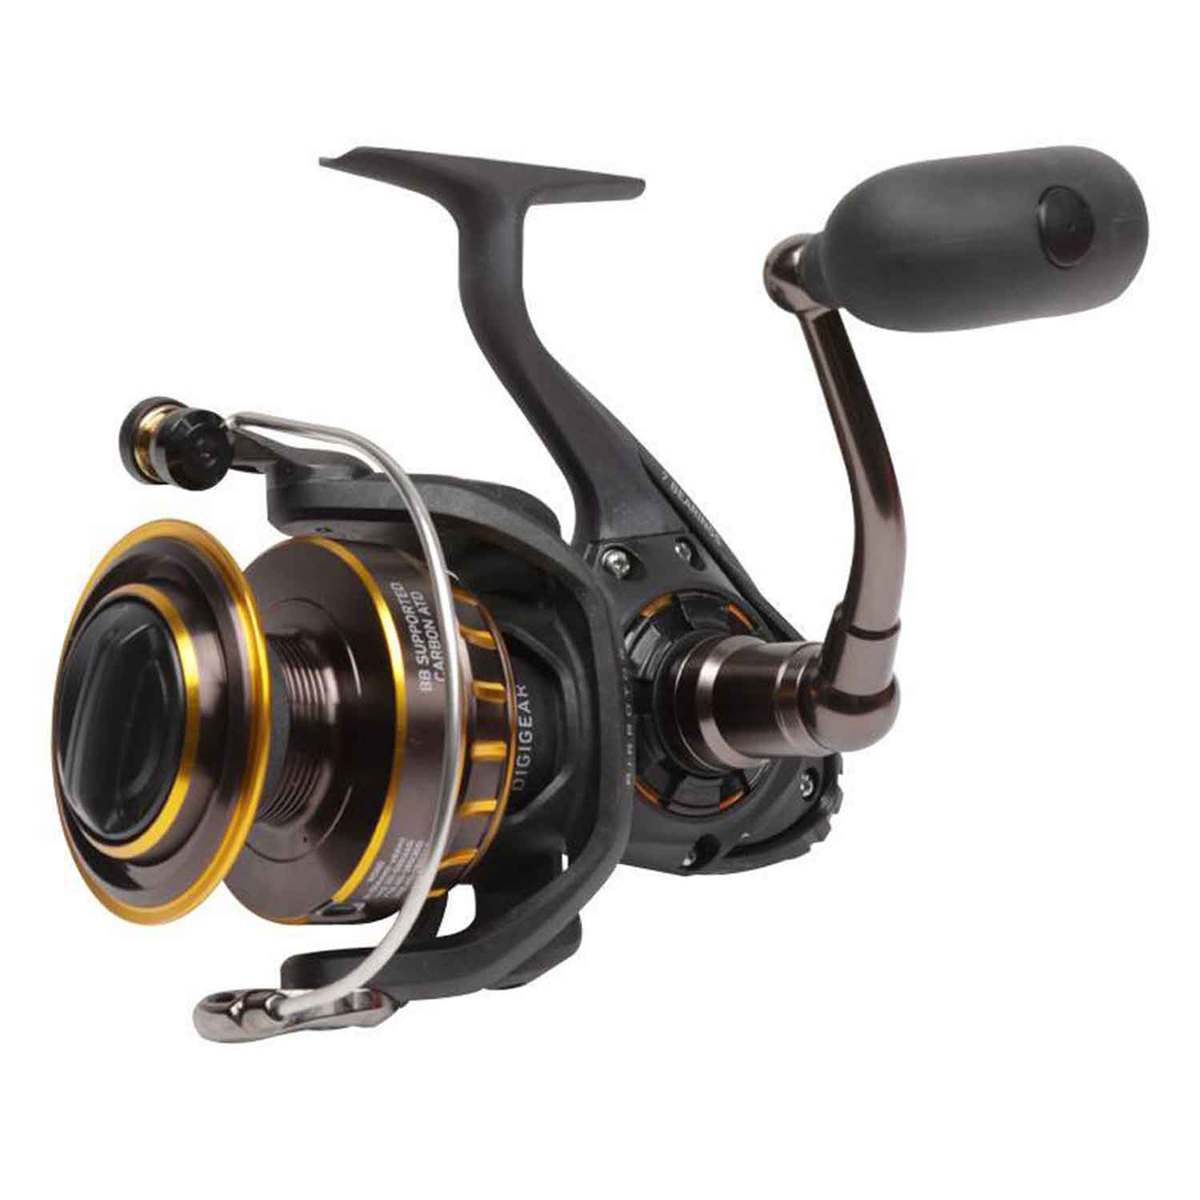 A12 Magnesium Spinning Reel Black Gold